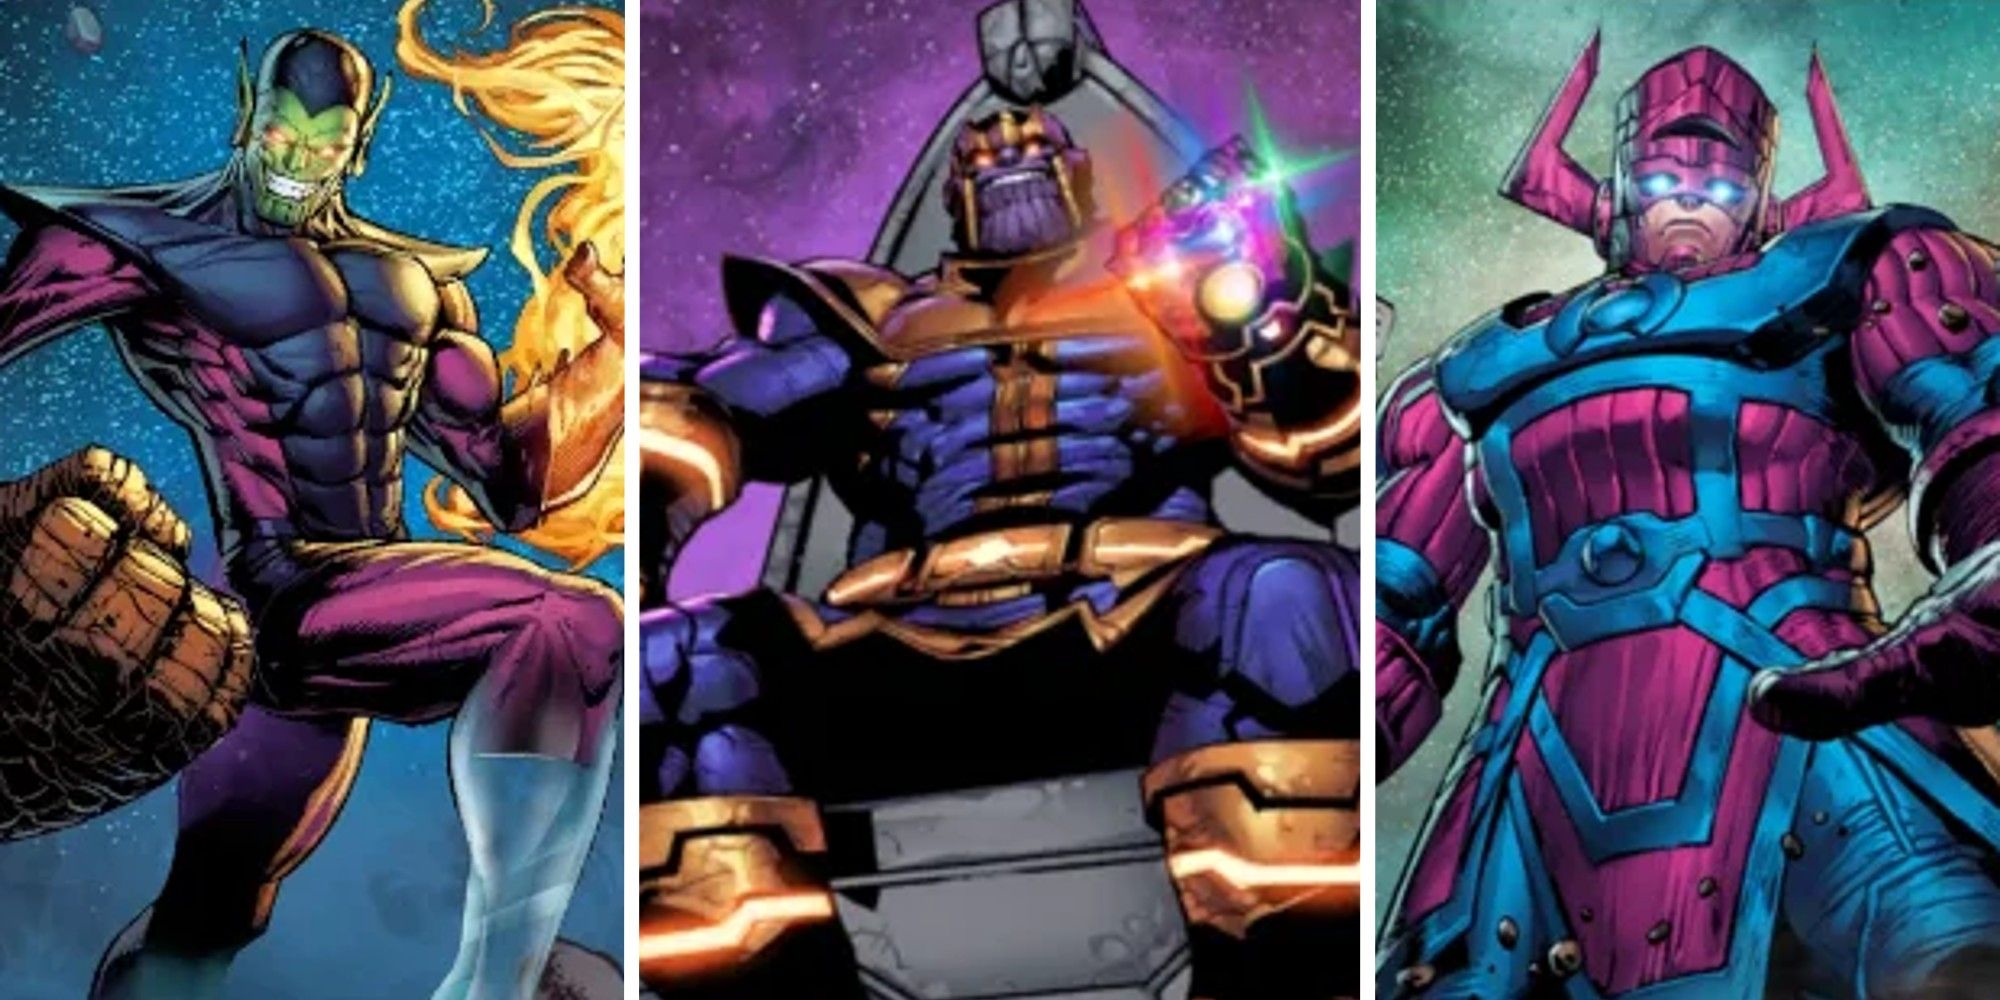 Marvel Snap Best Cards In Pool 5 Feature Image: Super Skrull, Thanos and Galactus